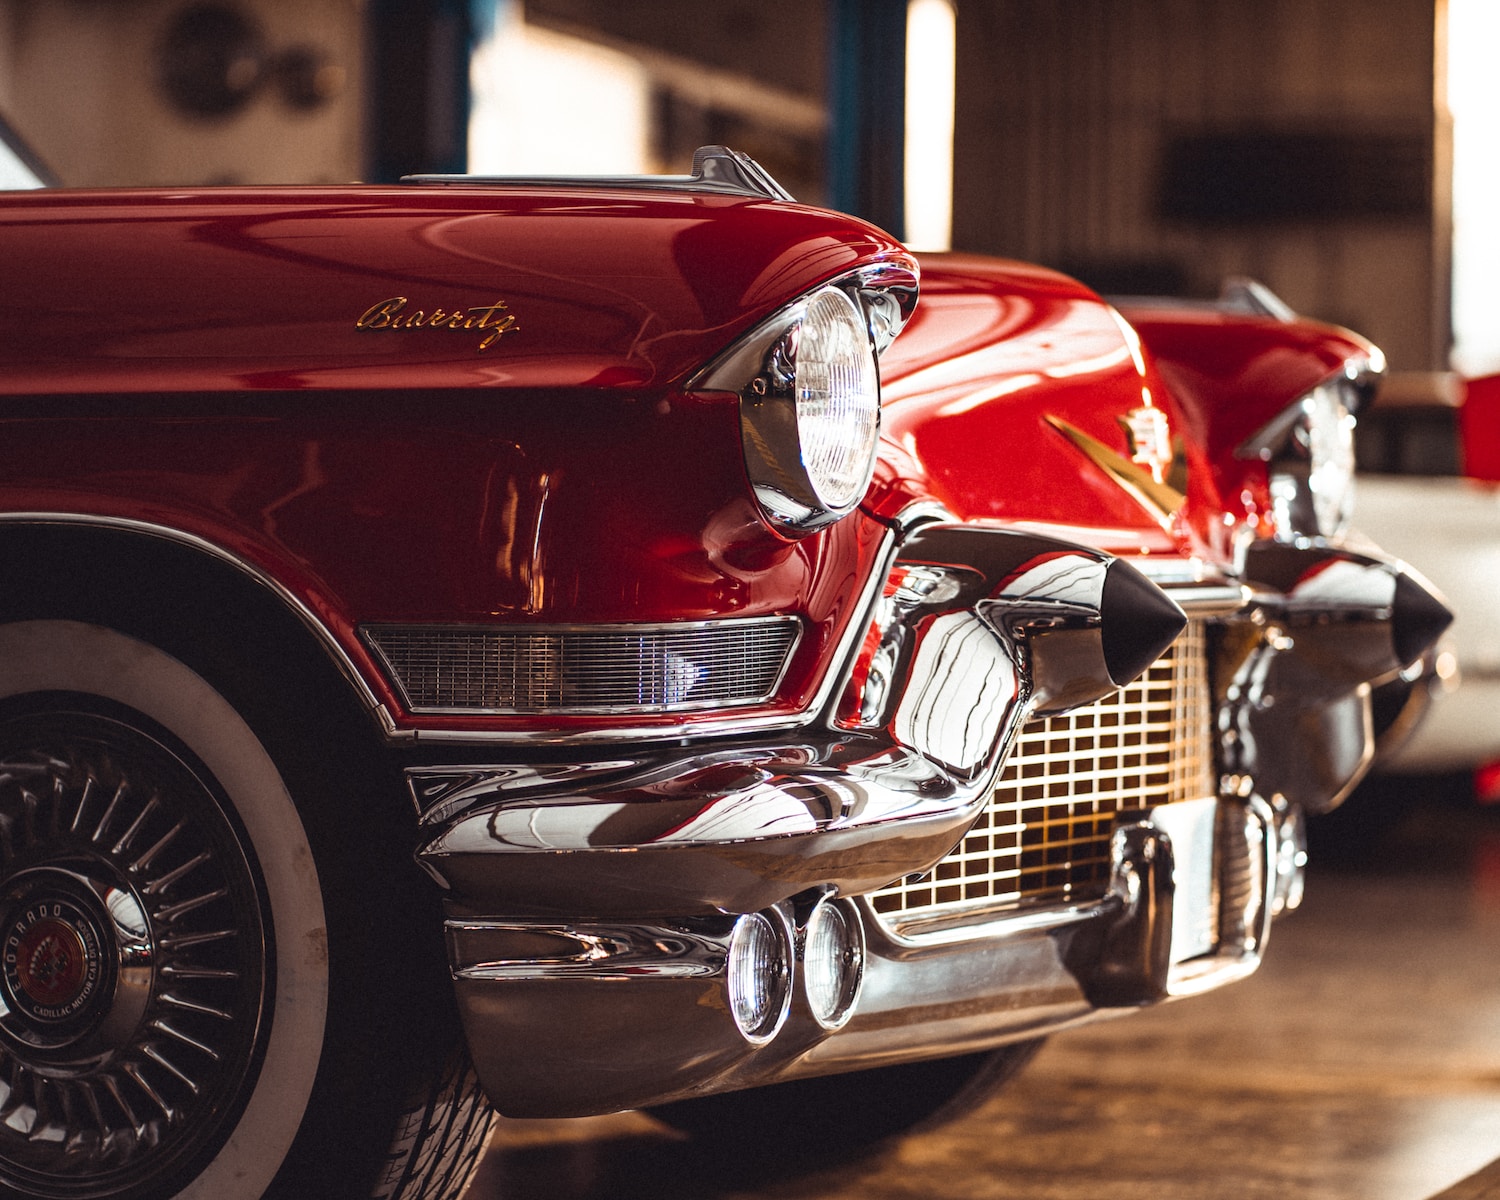 Which type of auto transport service is preferred by owners of classic, custom, and luxury cars?